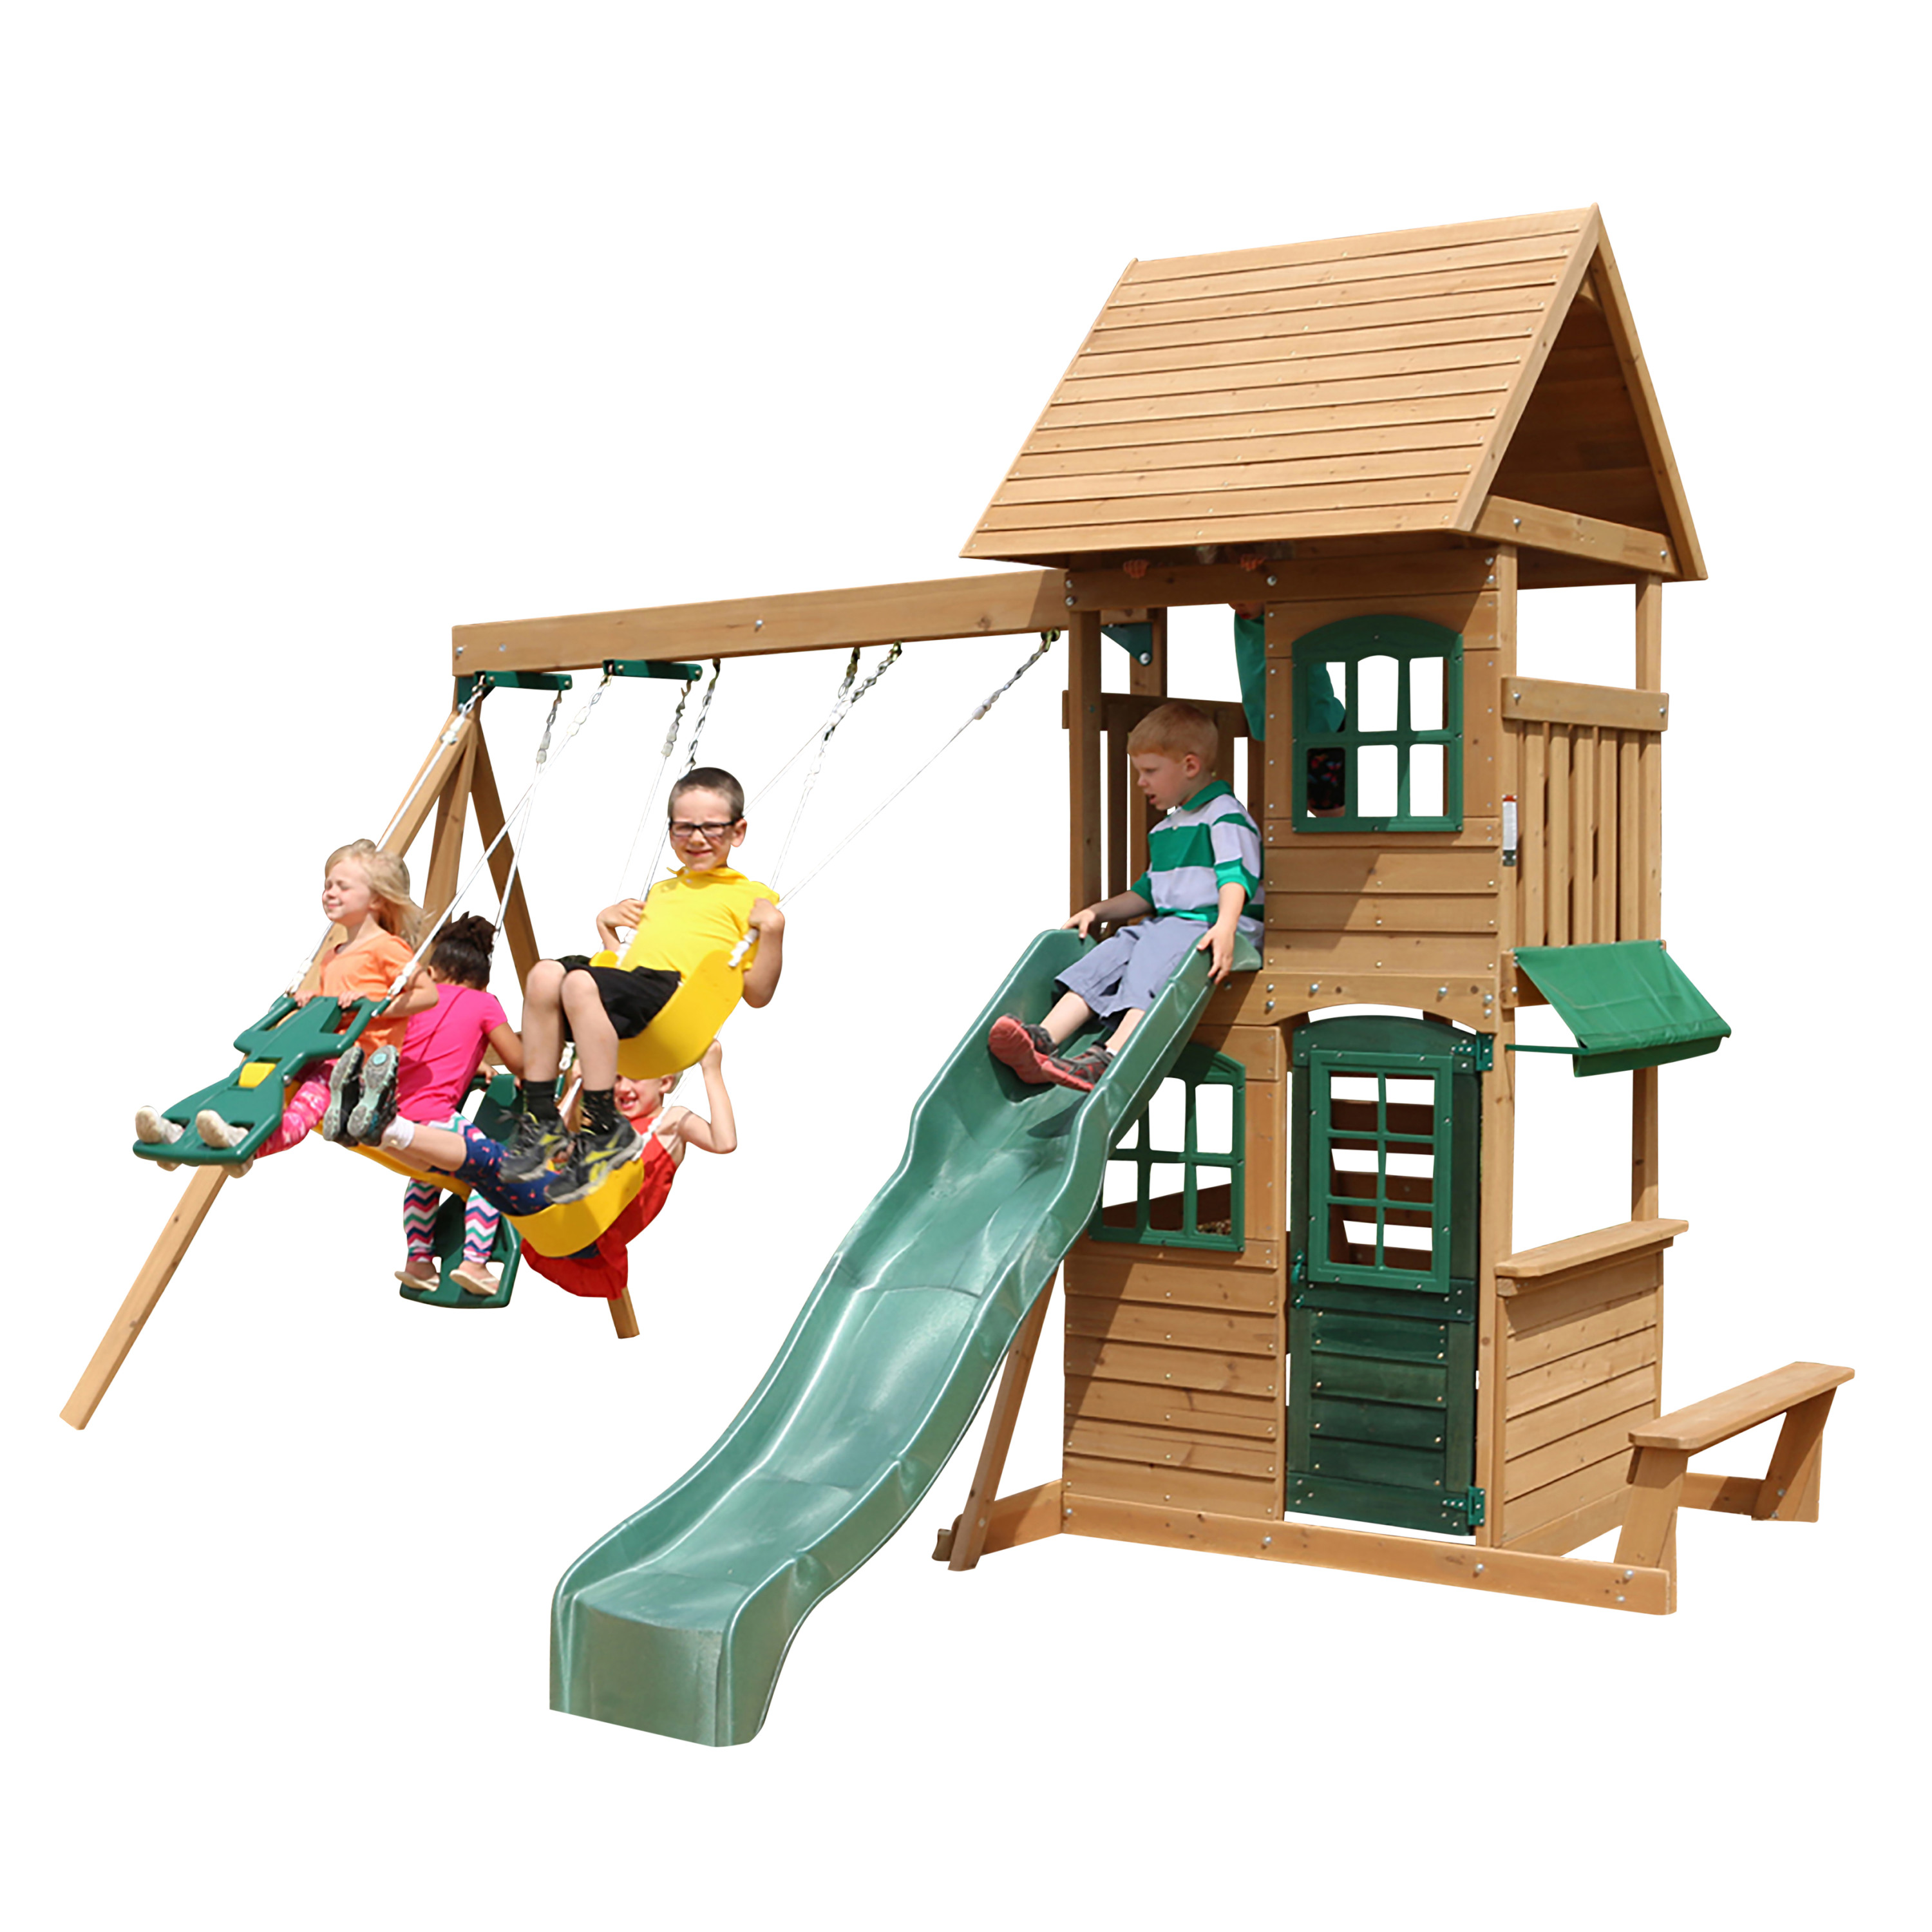 KidKraft Windale Wooden Swing Set / Playset with Clubhouse, Swings, Slide, Shaded Table and Bench - image 5 of 12